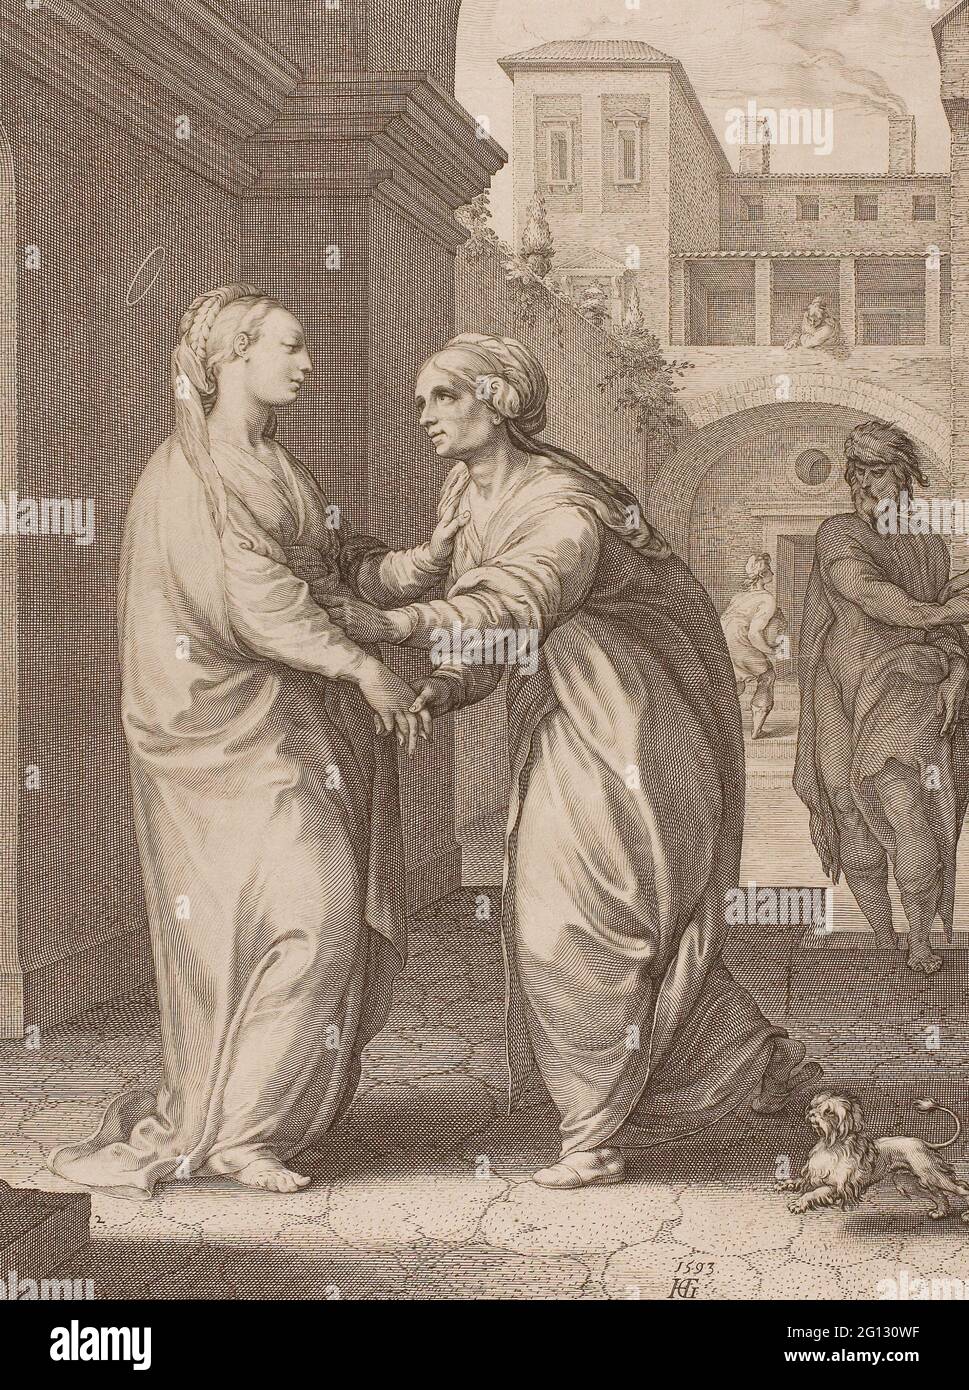 Hendrick Goltzius. The Visitation, plate two from The Birth and Early Life of Christ - 1593 - Hendrick Goltzius (Dutch, 1558-1617) Text written by Stock Photo